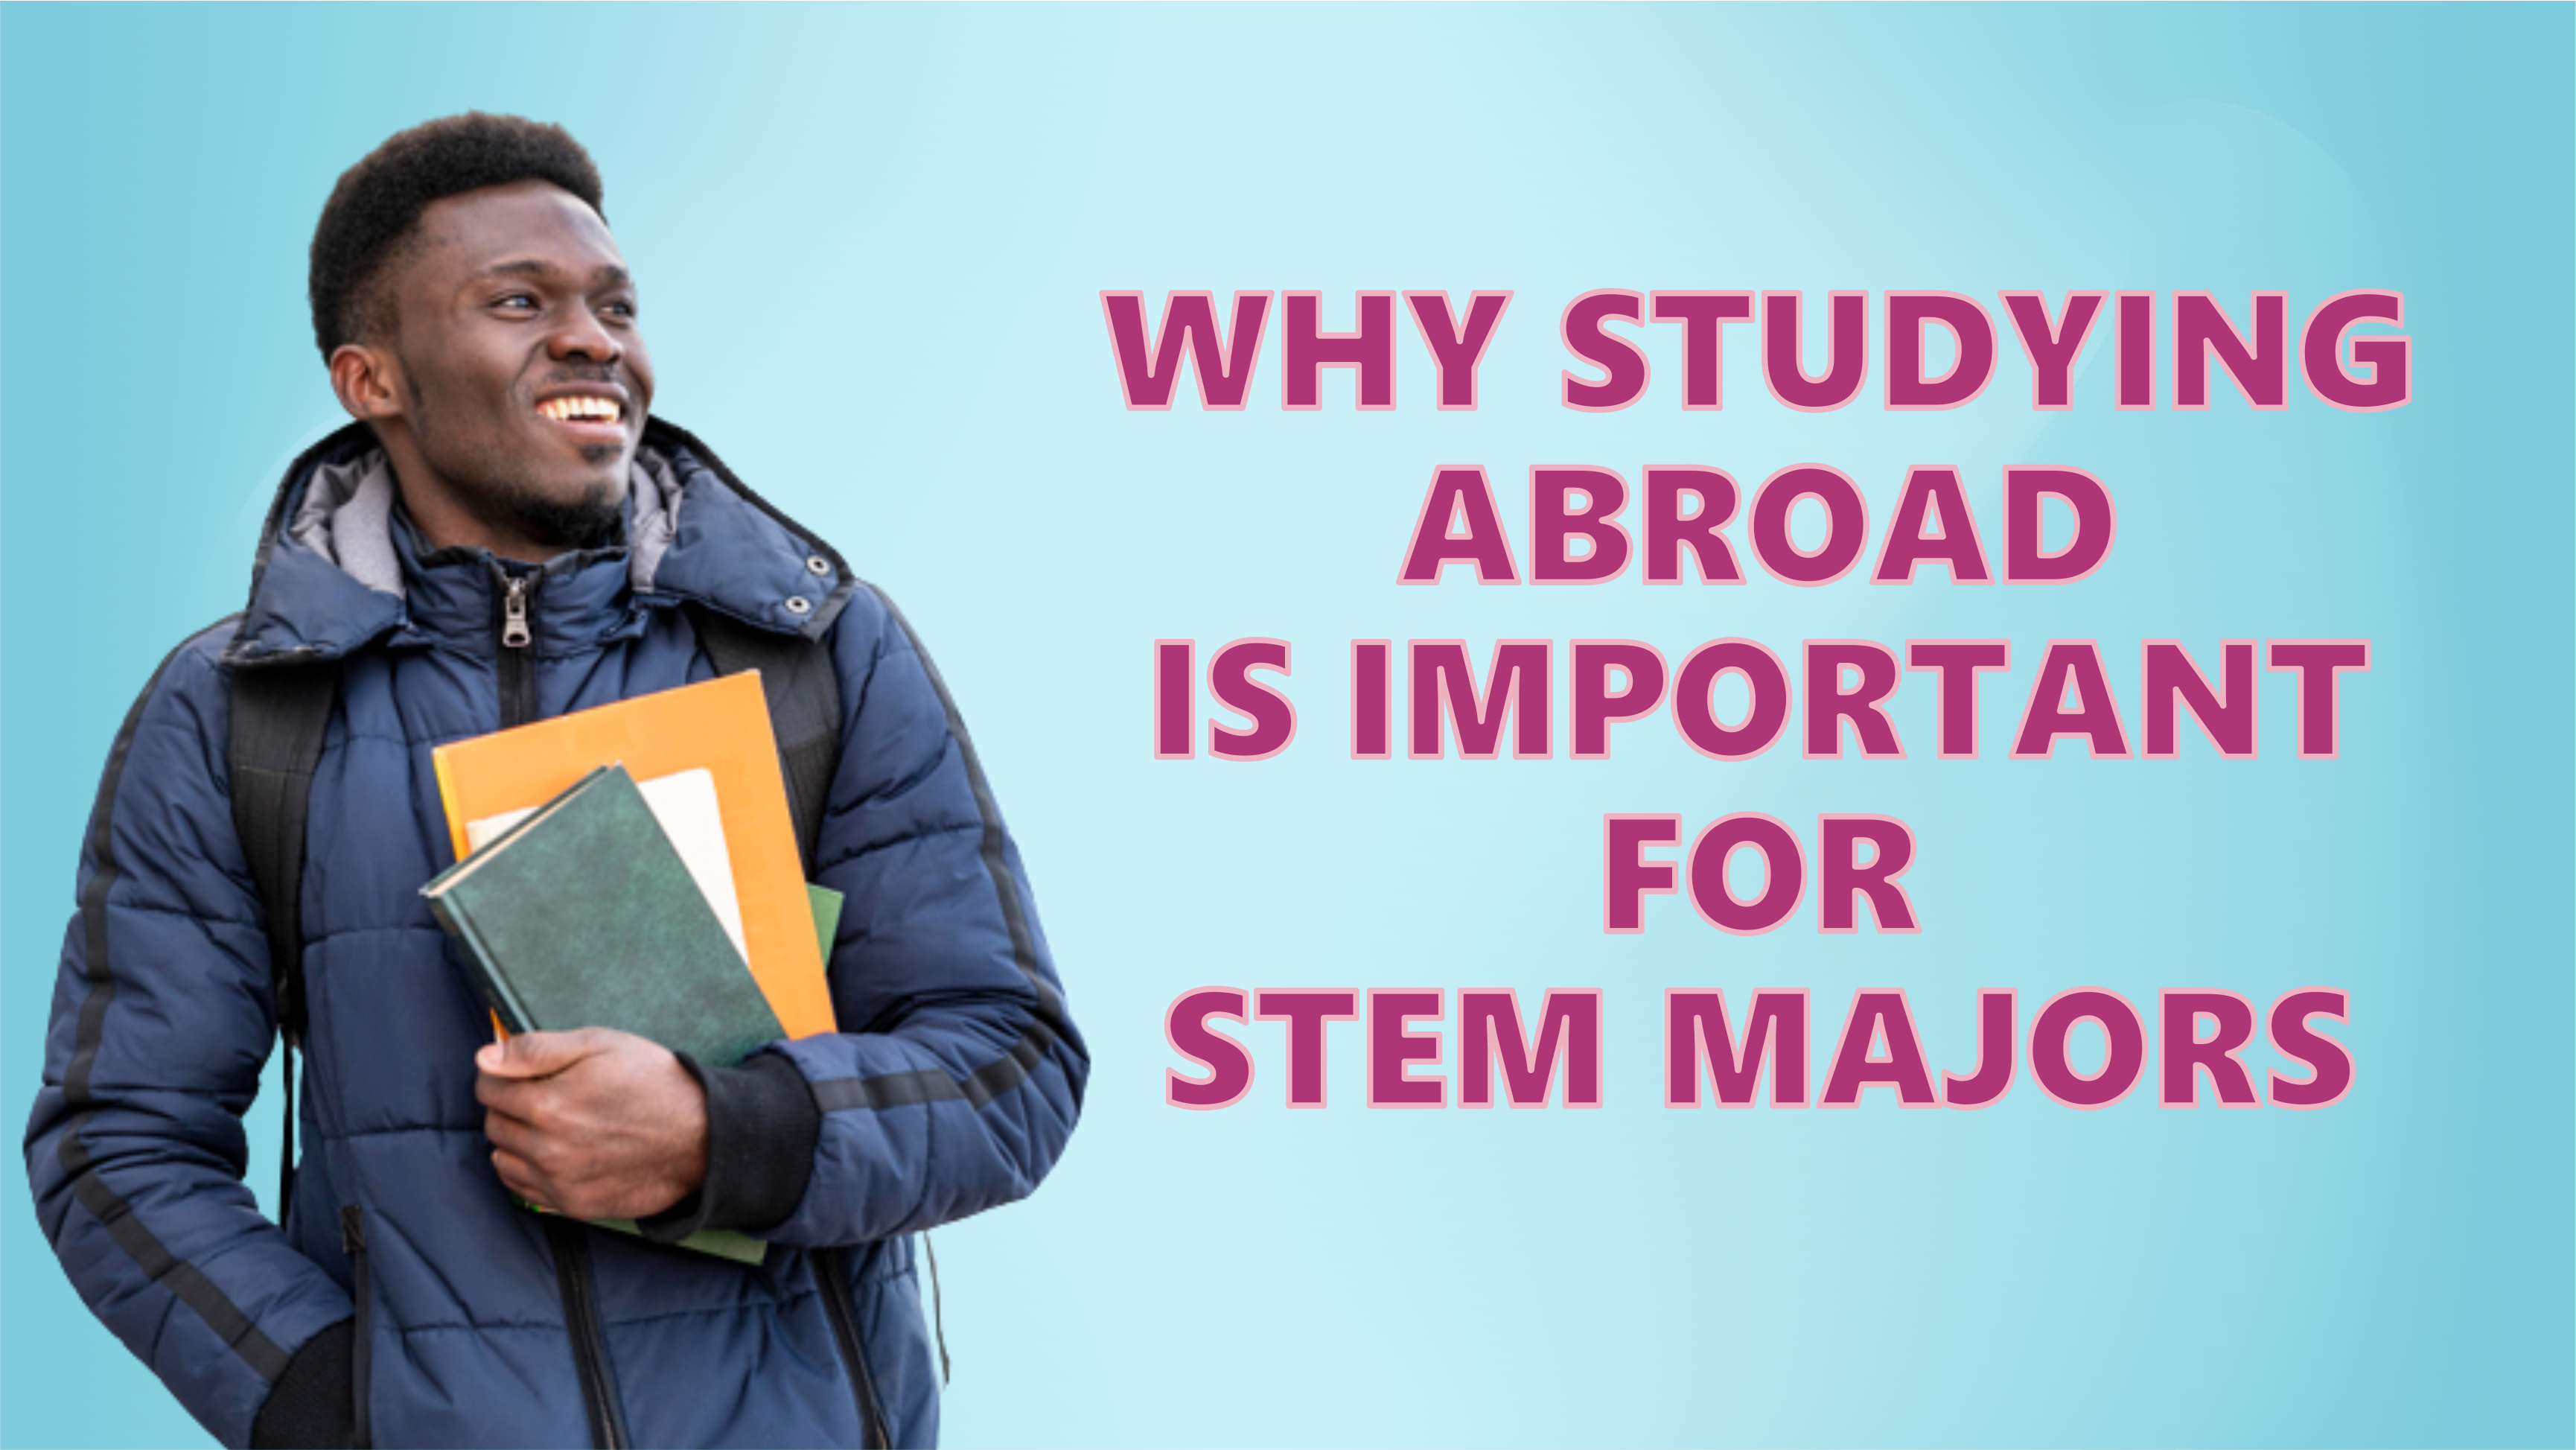 Why studying abroad is important for STEM majors